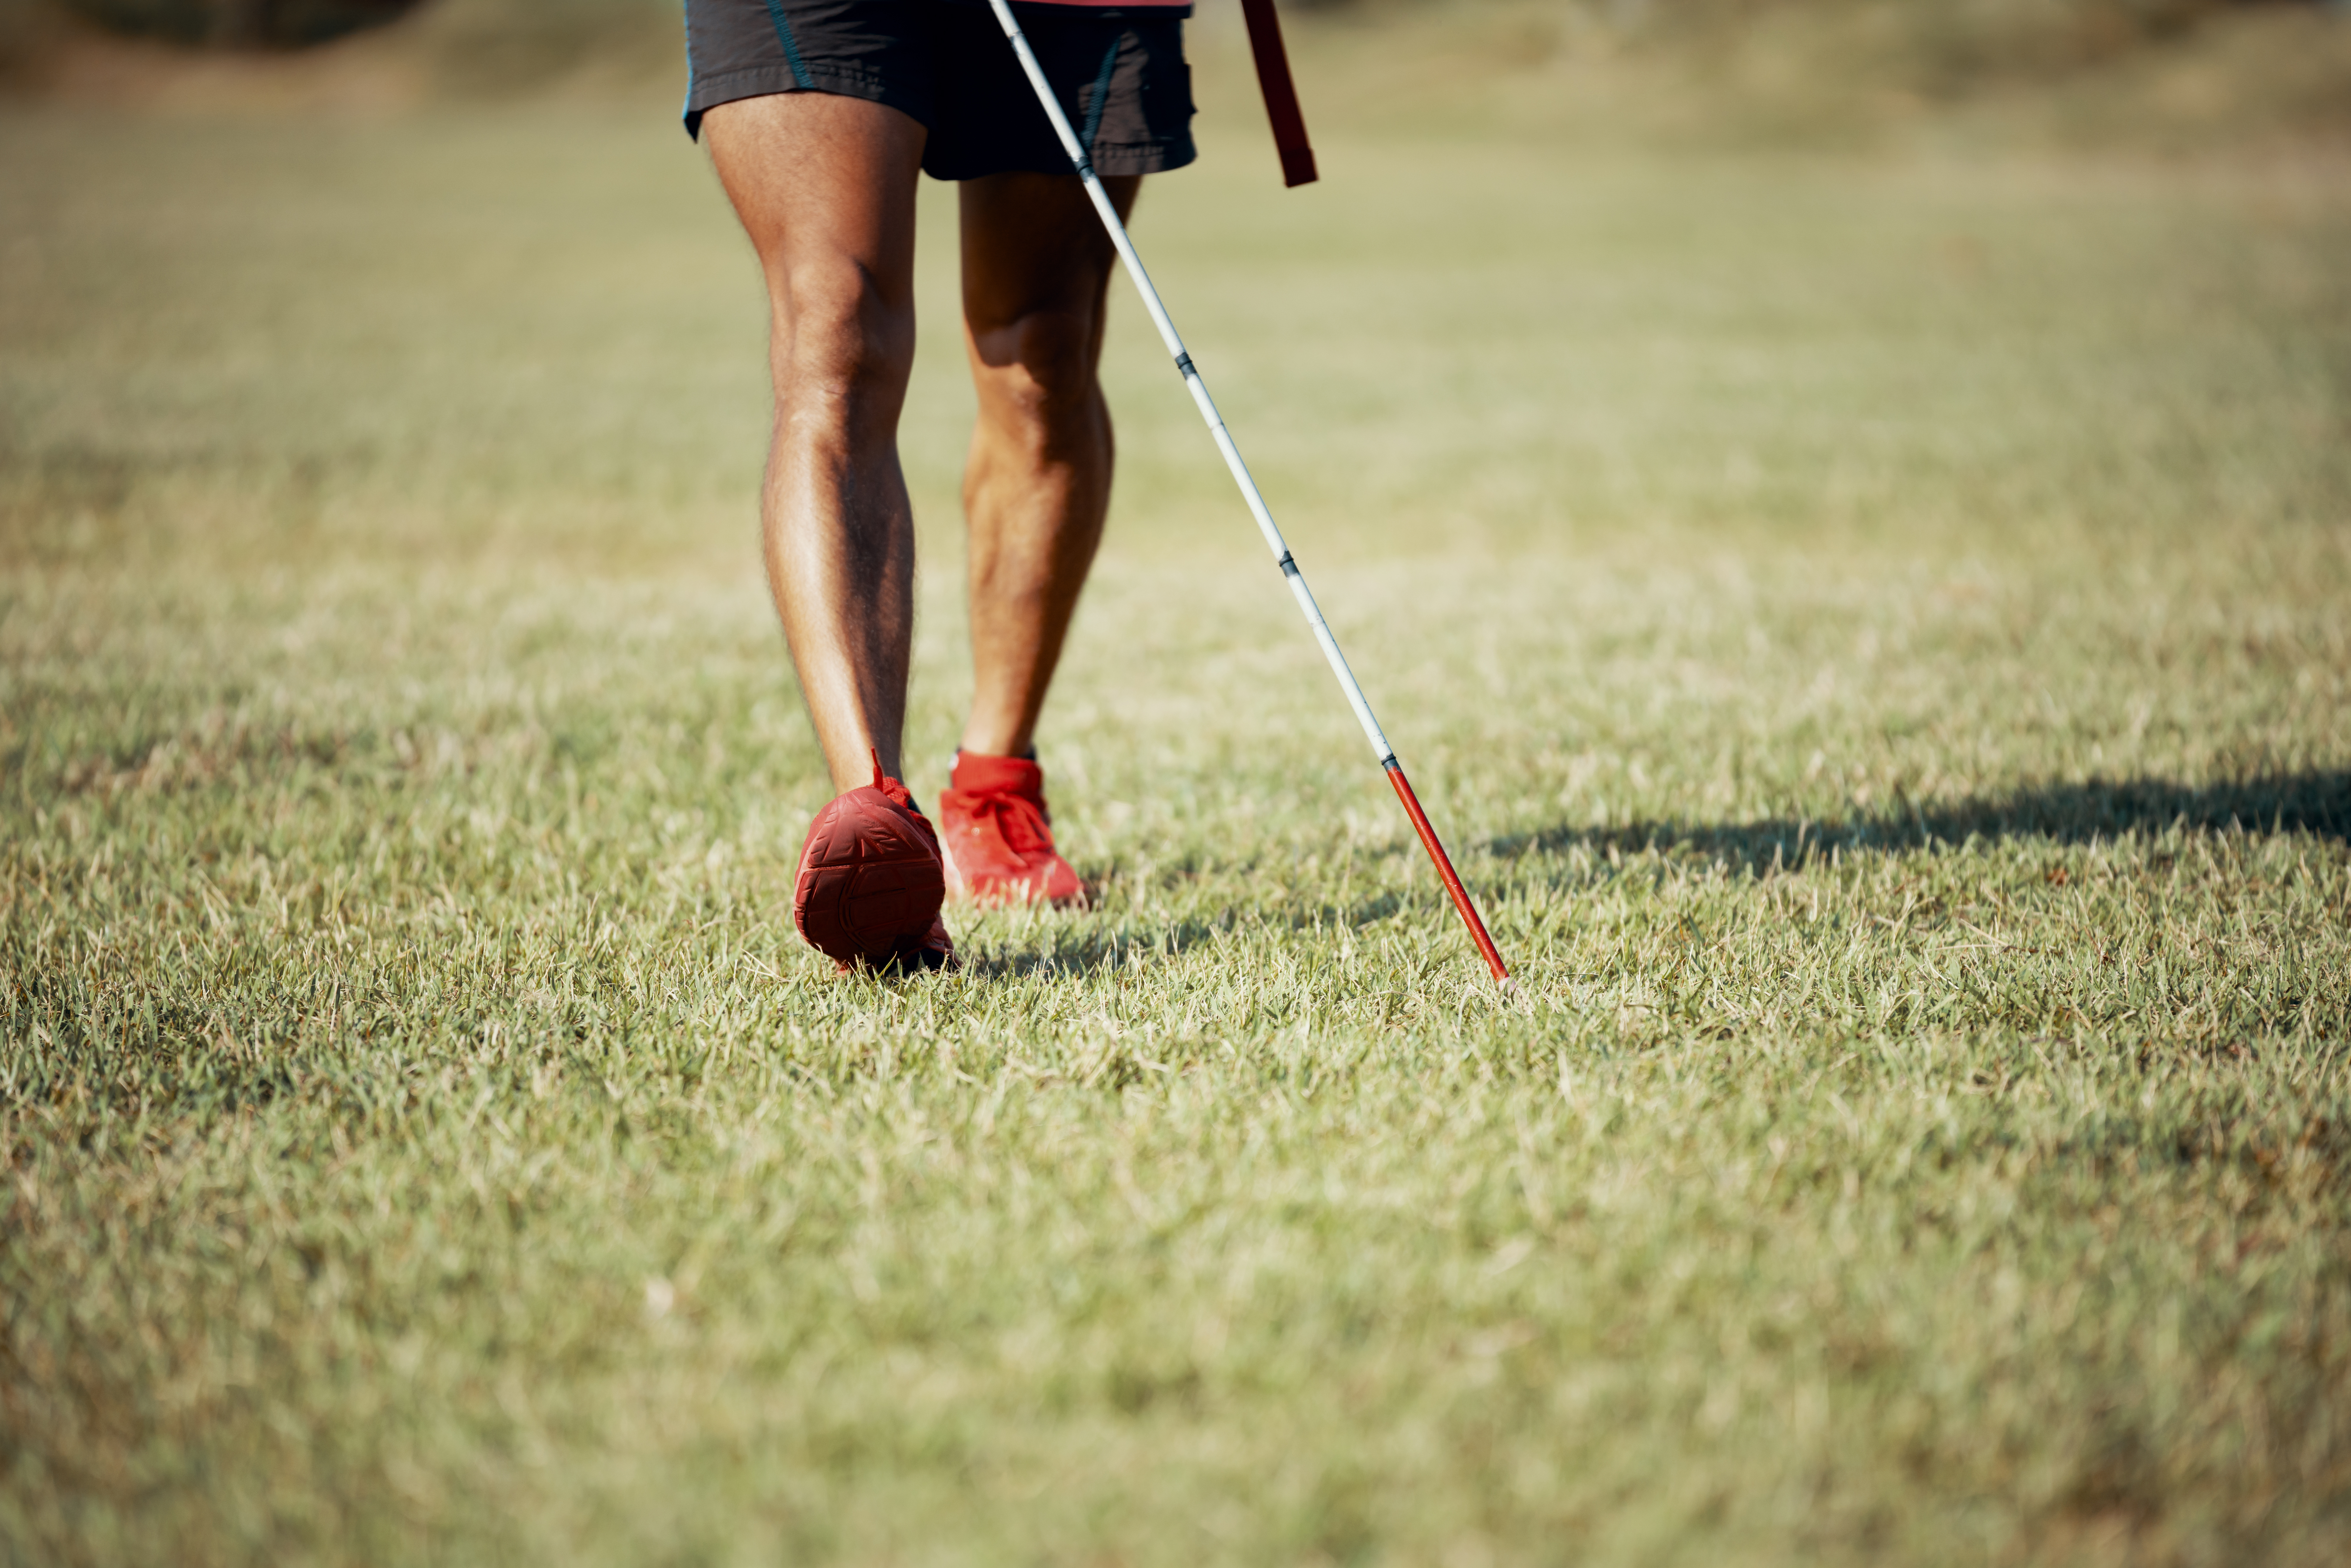 Blind marathon athlete walking with his white cane before competing